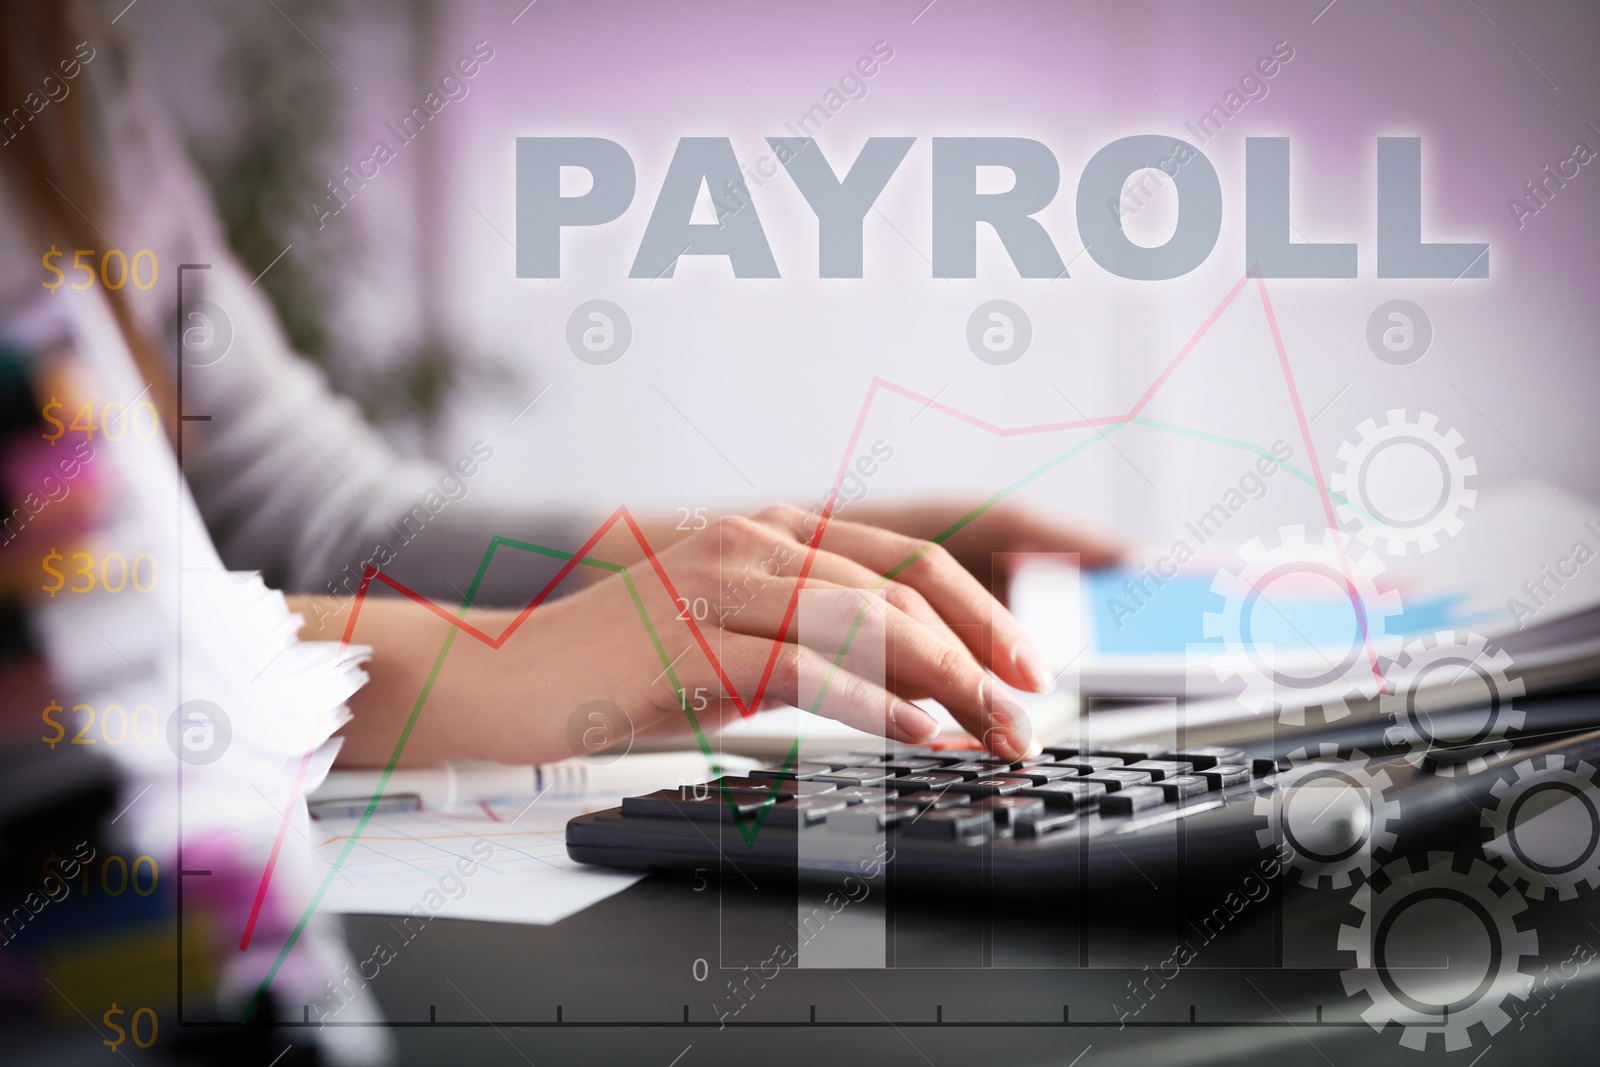 Image of Payroll. Woman using calculator at table, closeup. Illustrations of graphs and icons